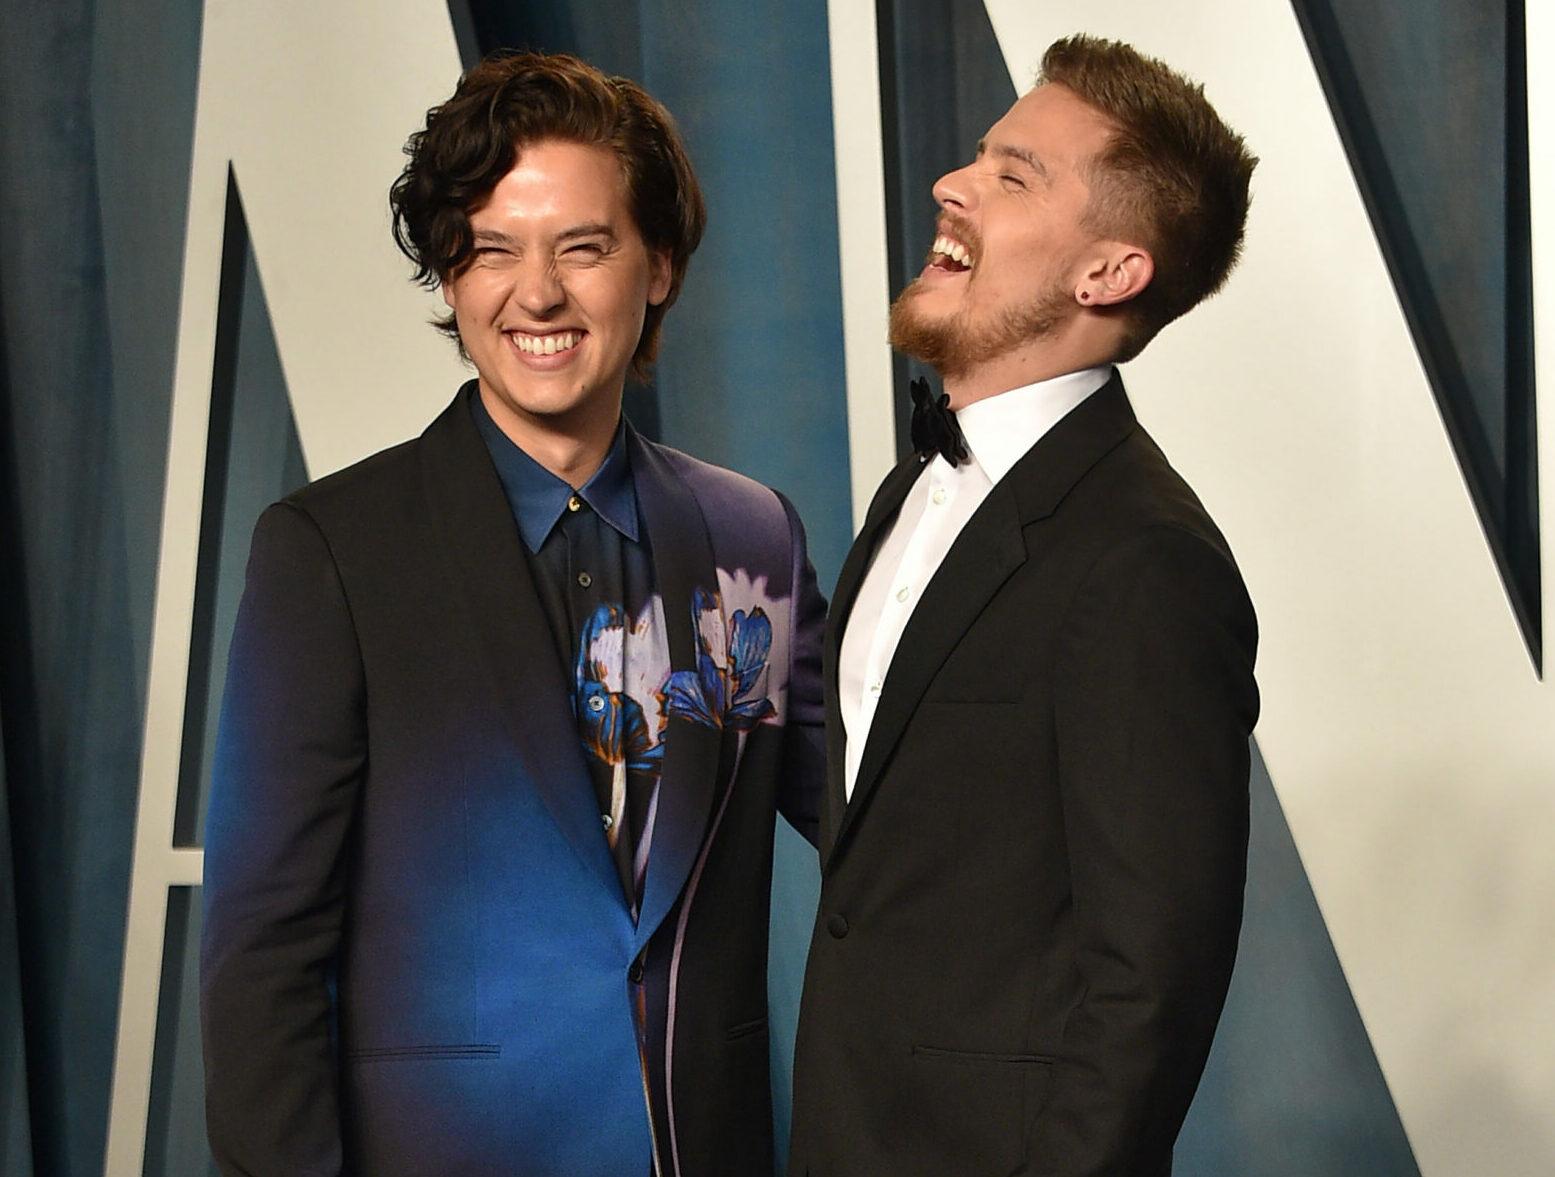 Dylan Sprouse And Cole Sprouse at the 2022 Vanity Fair Oscar Party hosted by editor Radhika Jones